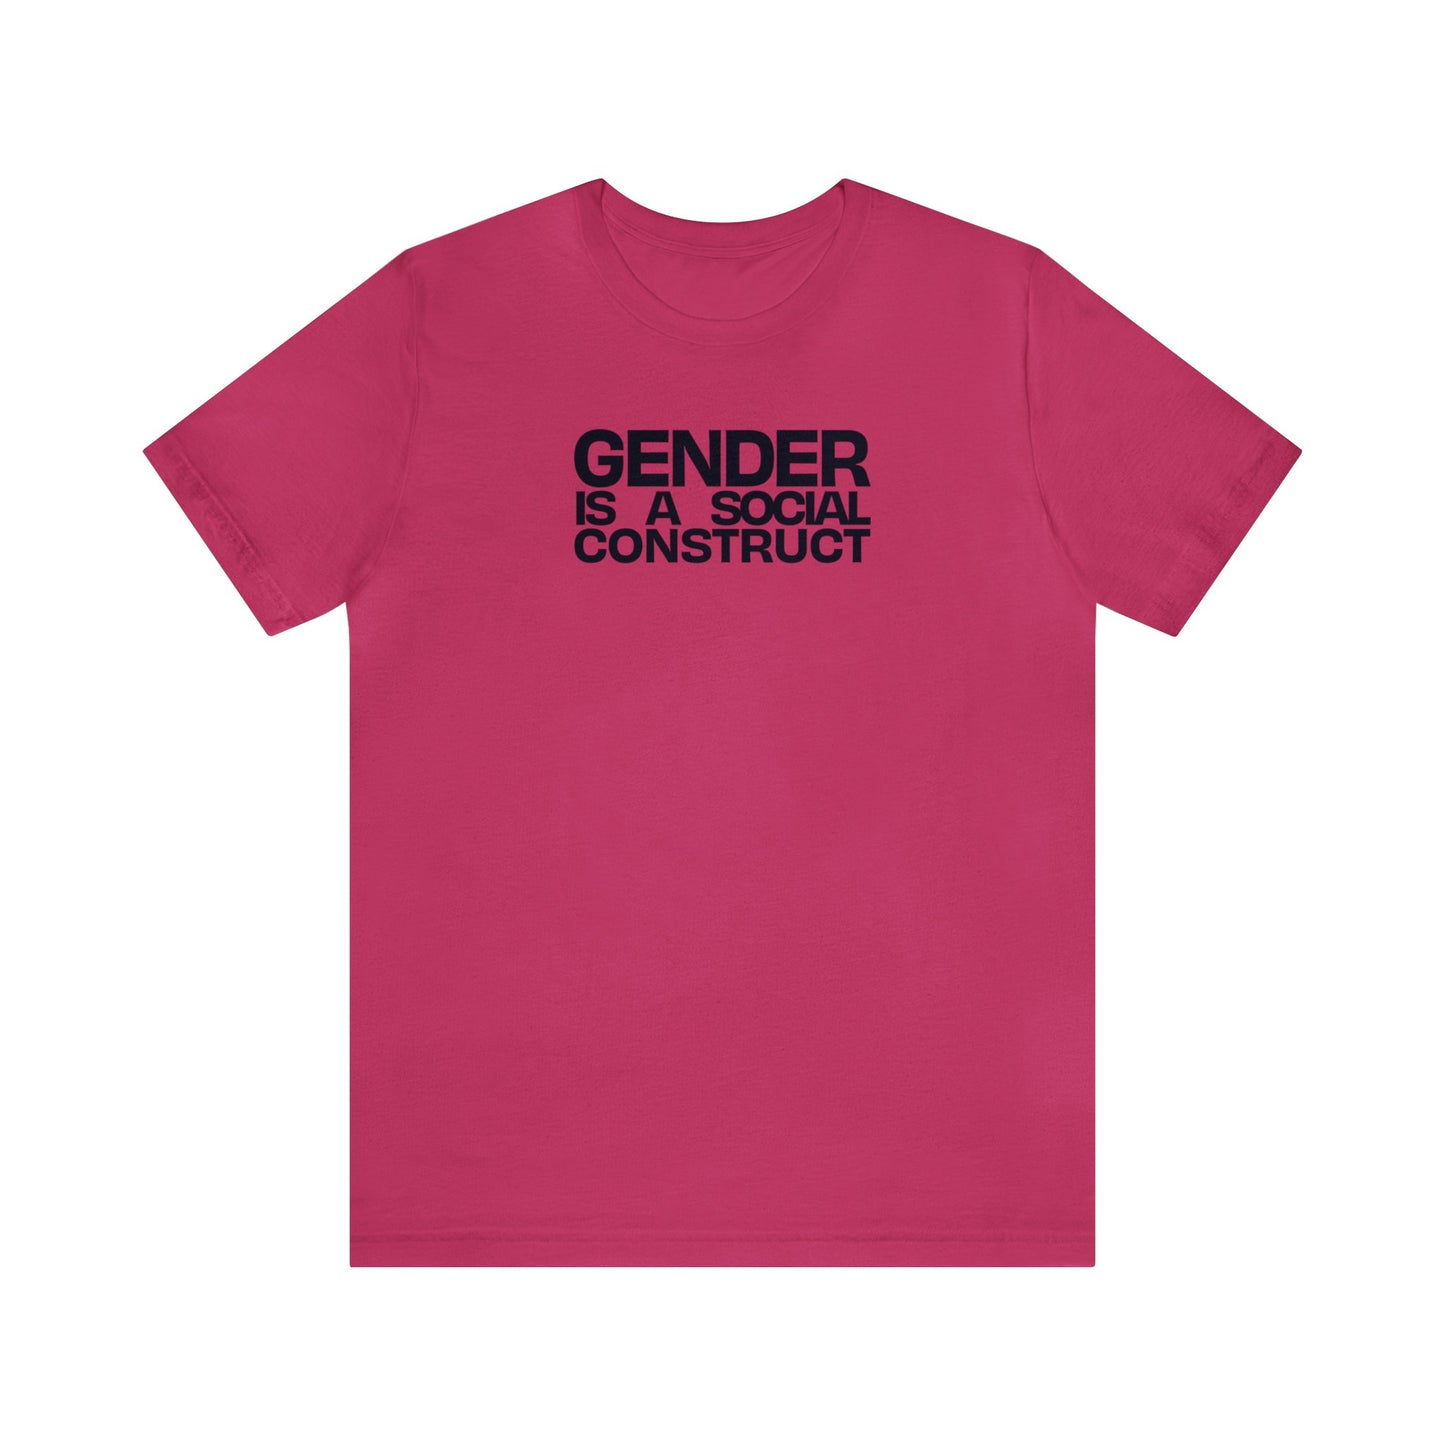 Gender Is A Social Construct Tee